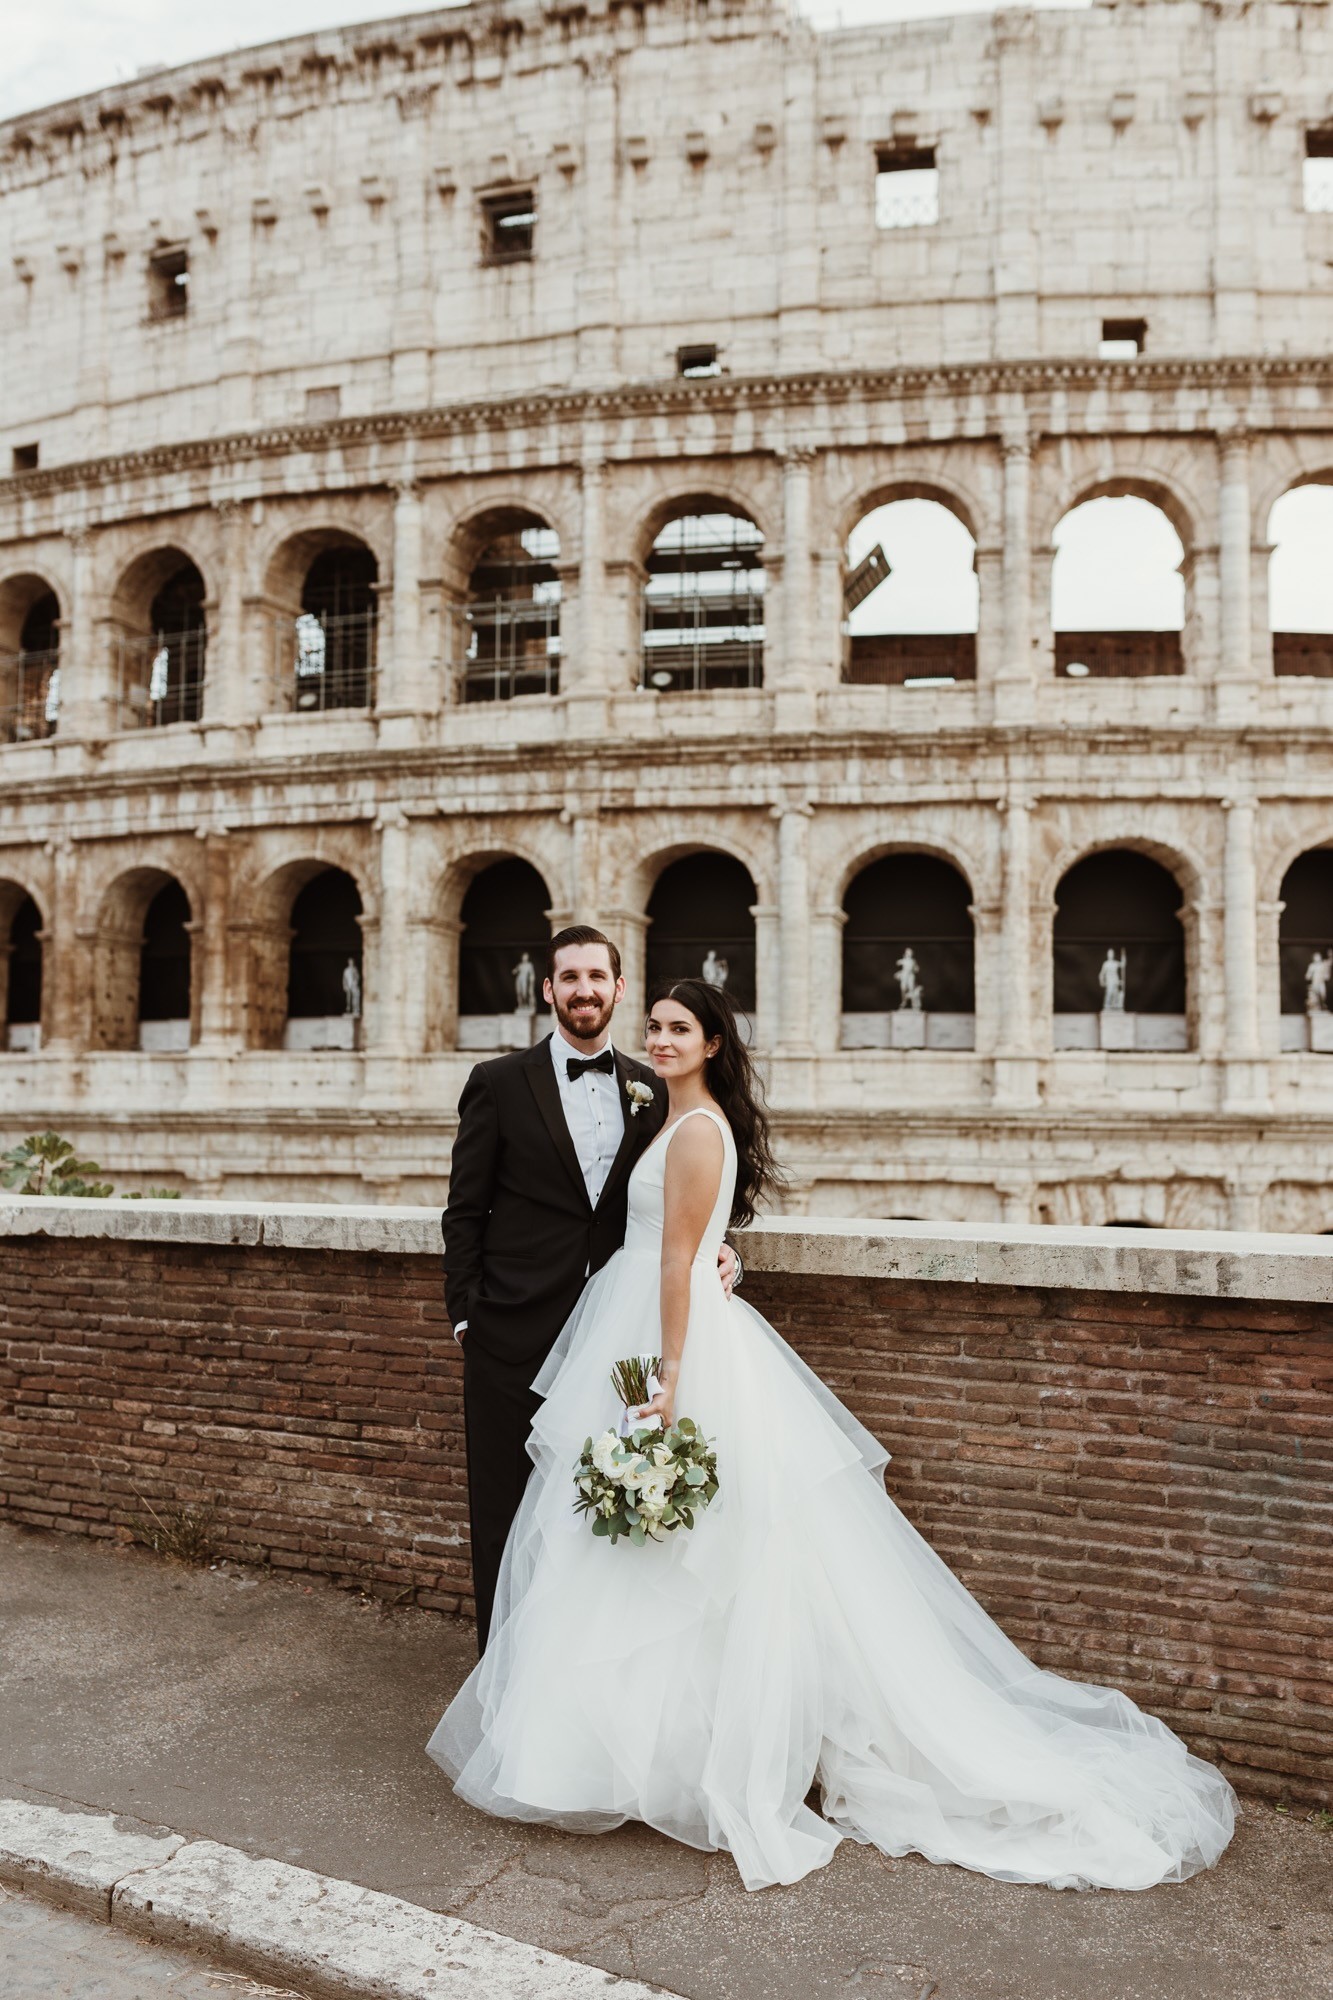 Bride And Groom Standing In Front Of Colleseum With Bride Wearing A Dress Called Fatima By Maggie Sottero